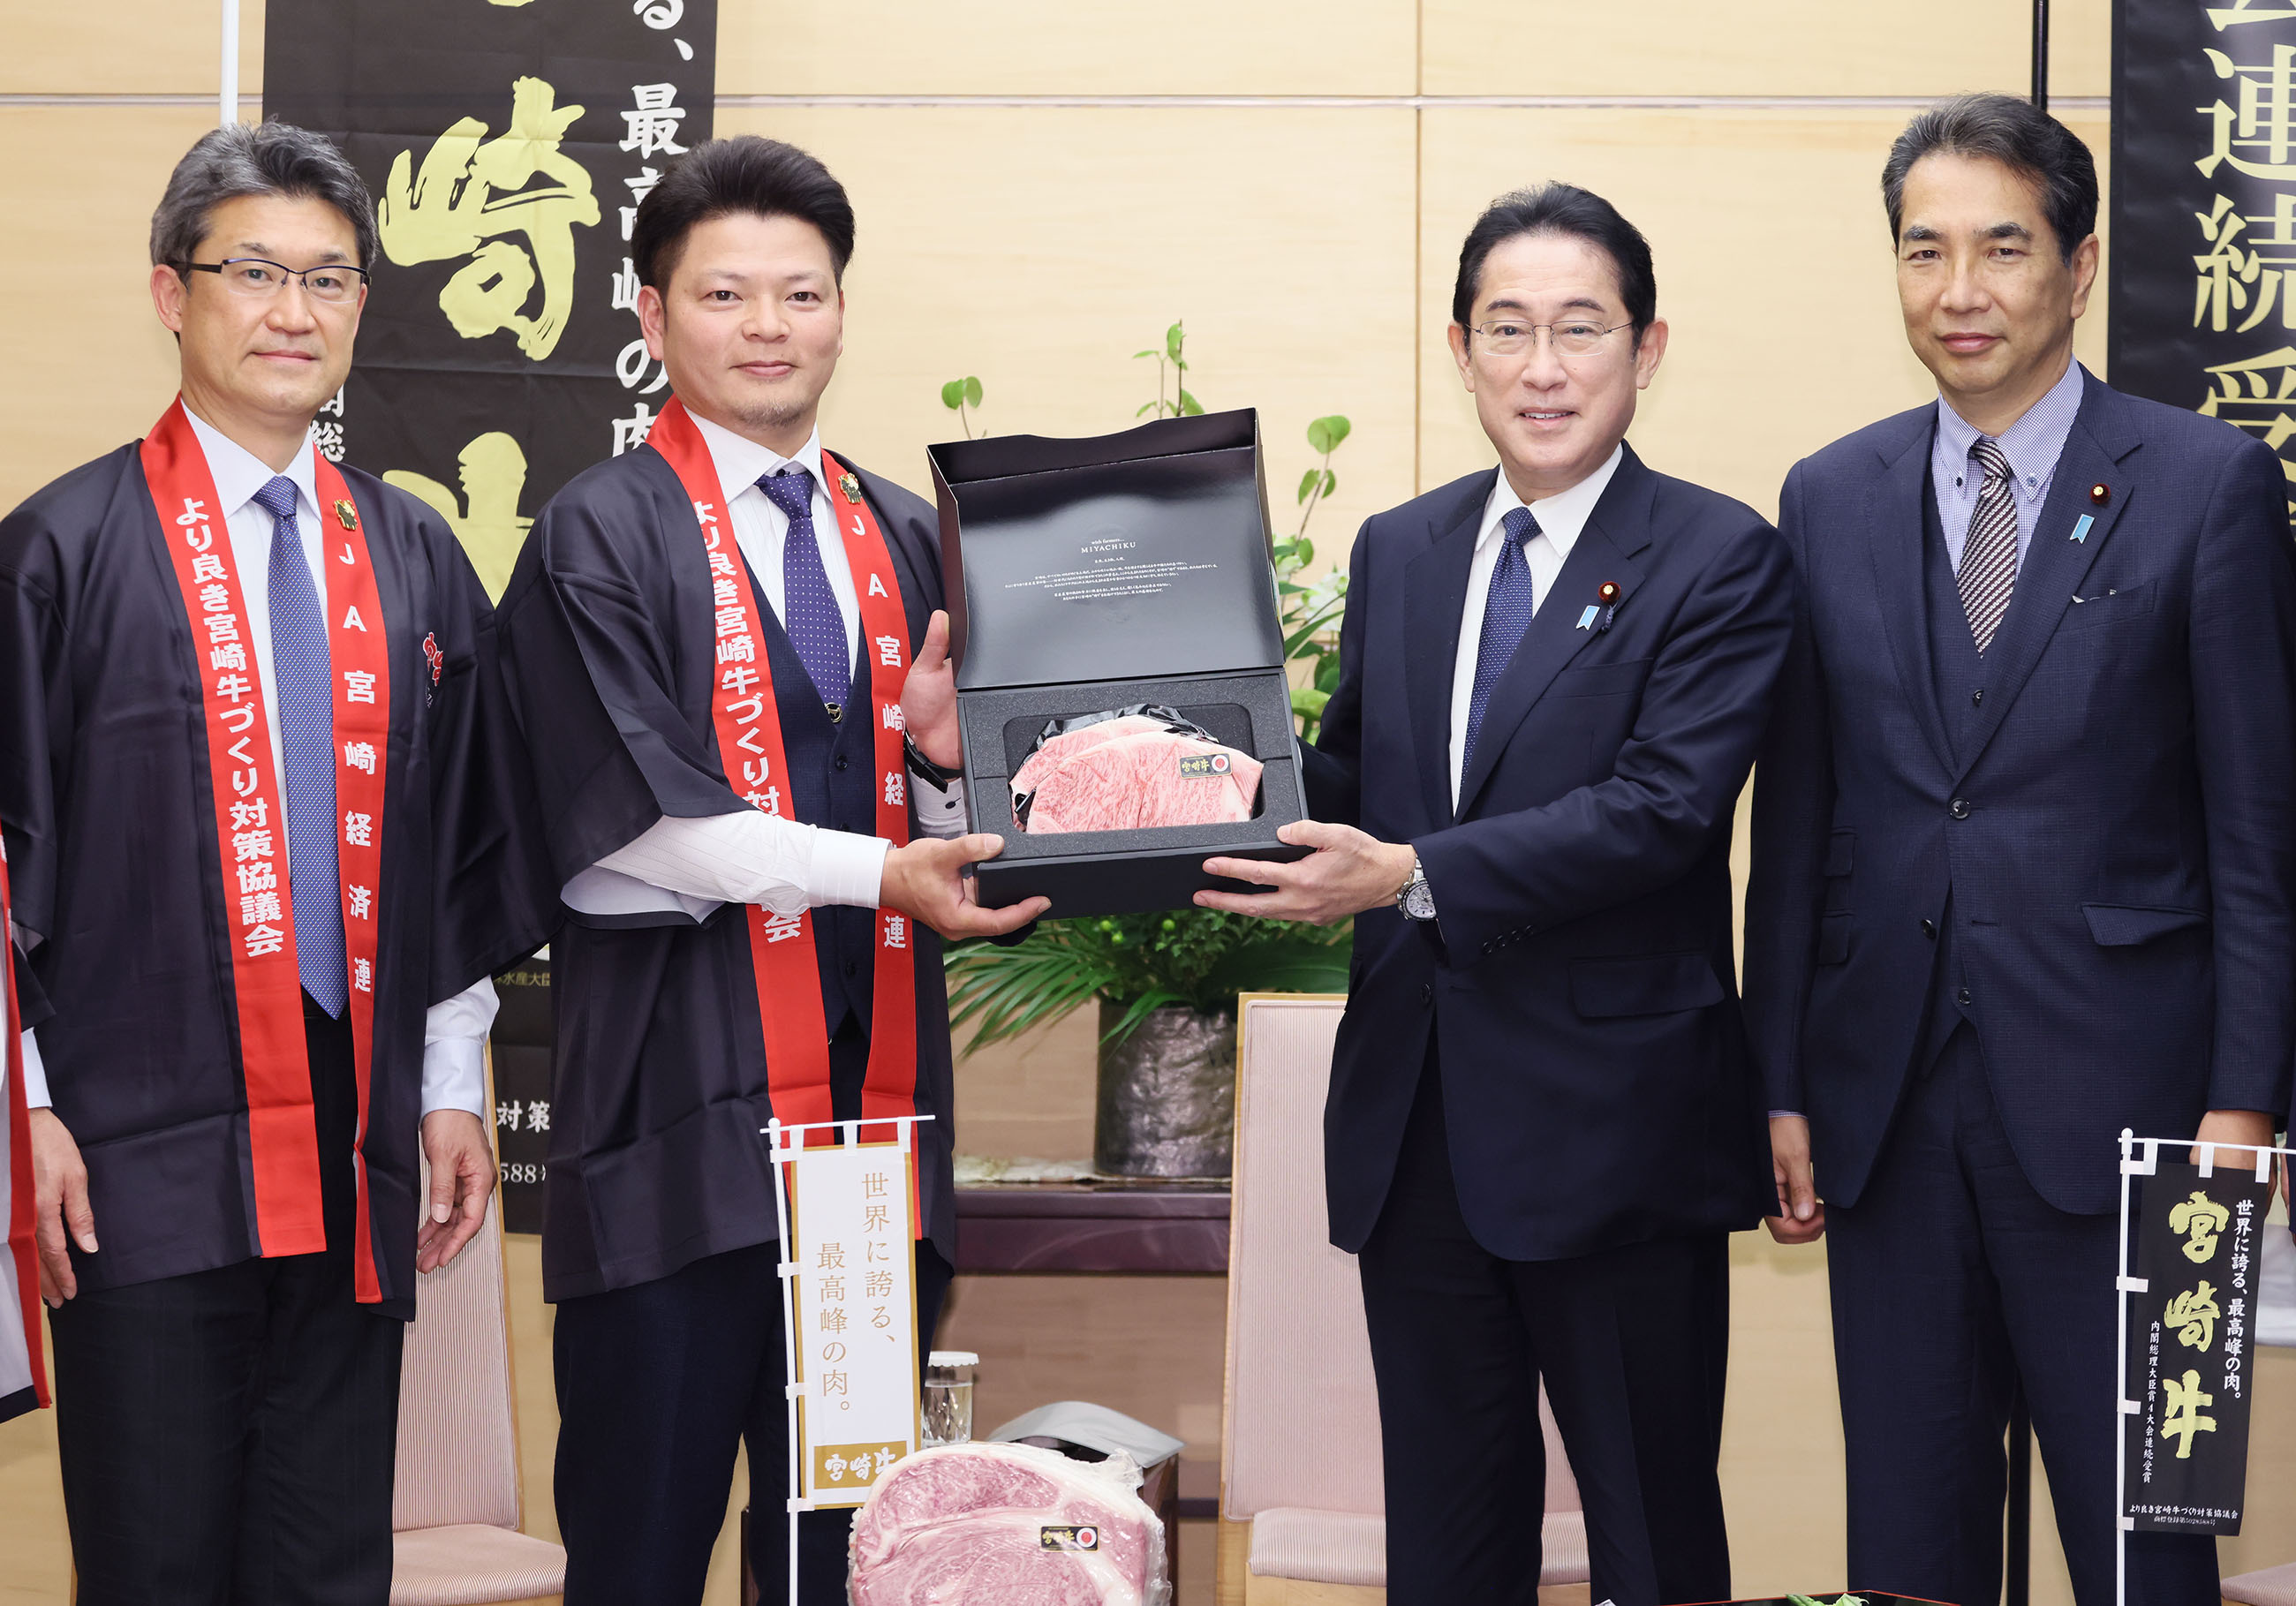 Presentation of Prime Minister’s Award Winning Beef by Producers of Miyazaki Beef